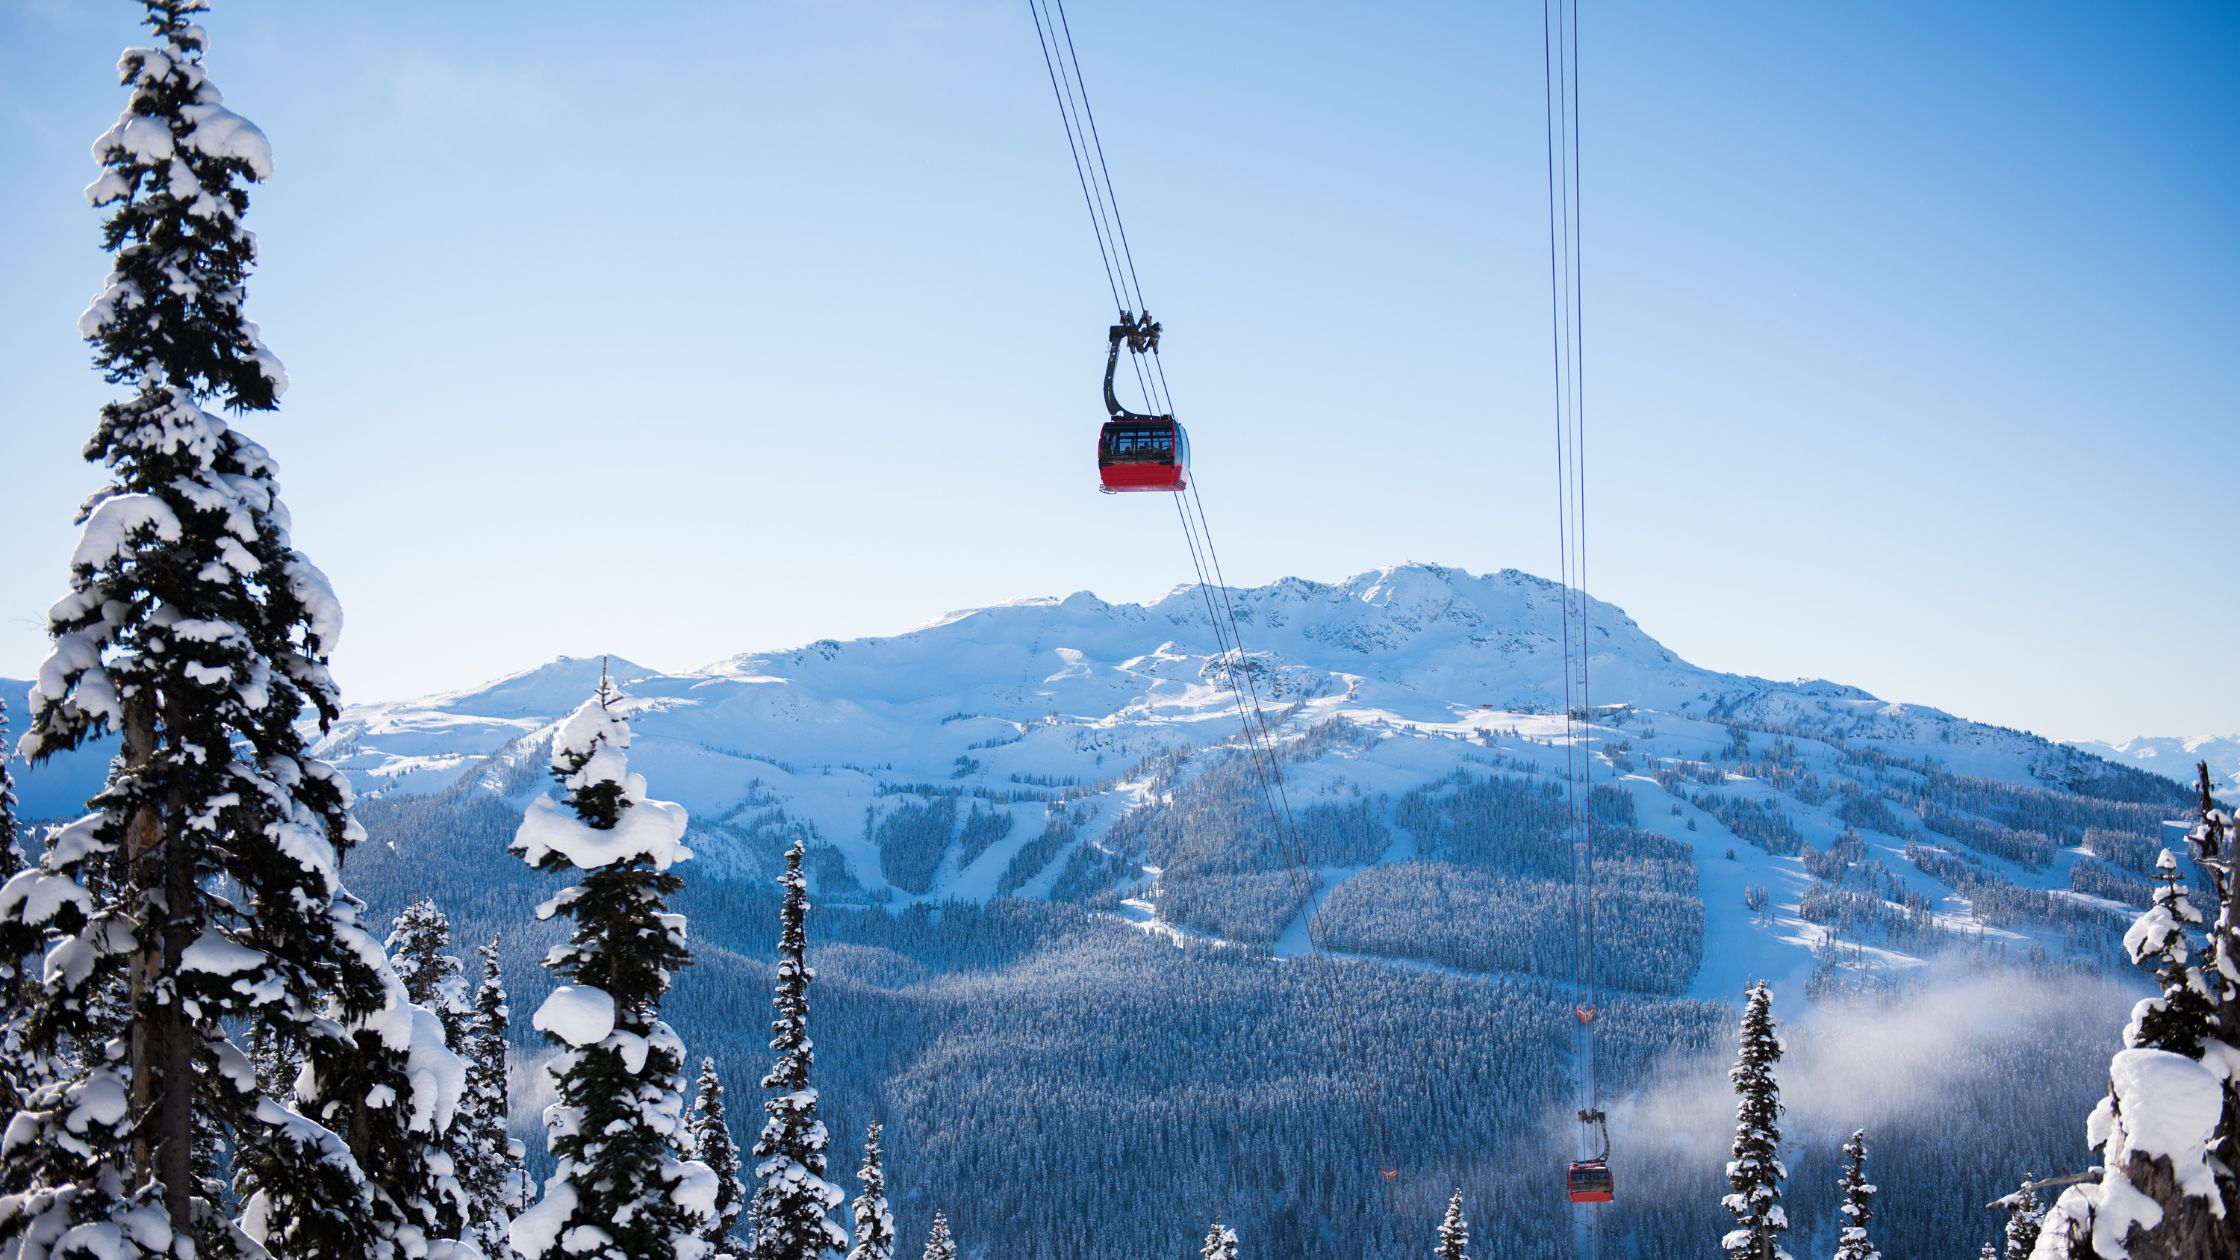 An image of Whistler